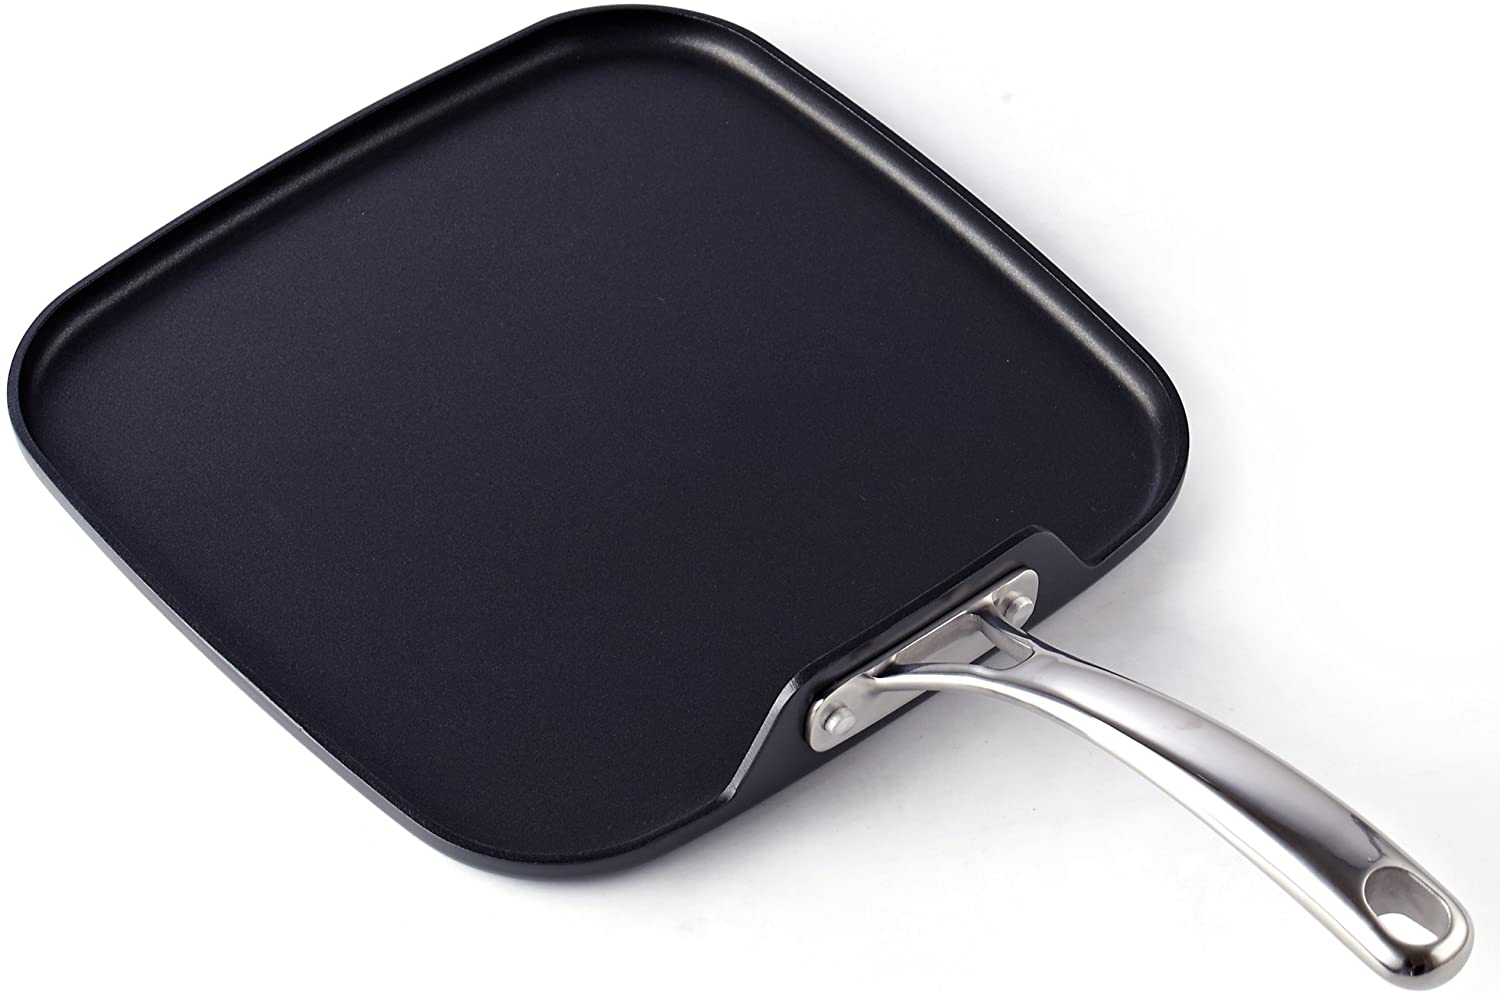 Cooks Standard Nonstick Square Griddle Pan 11 x 11-Inch, Hard Anodized